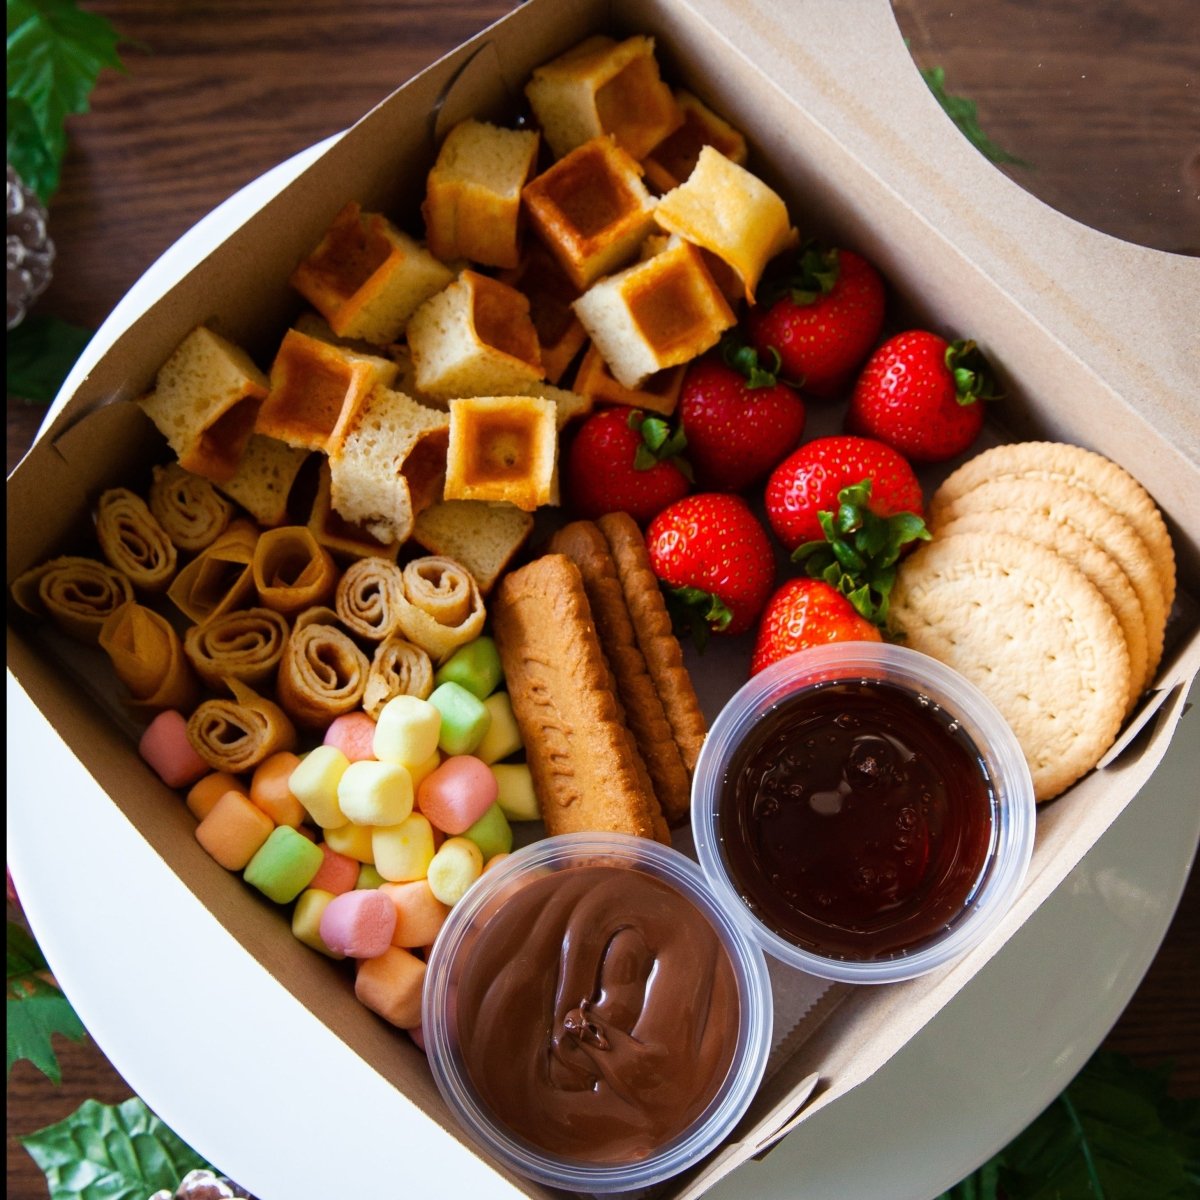 Joy Box is like bringing a fondue with all the treats you love from Nana's Creperie home!